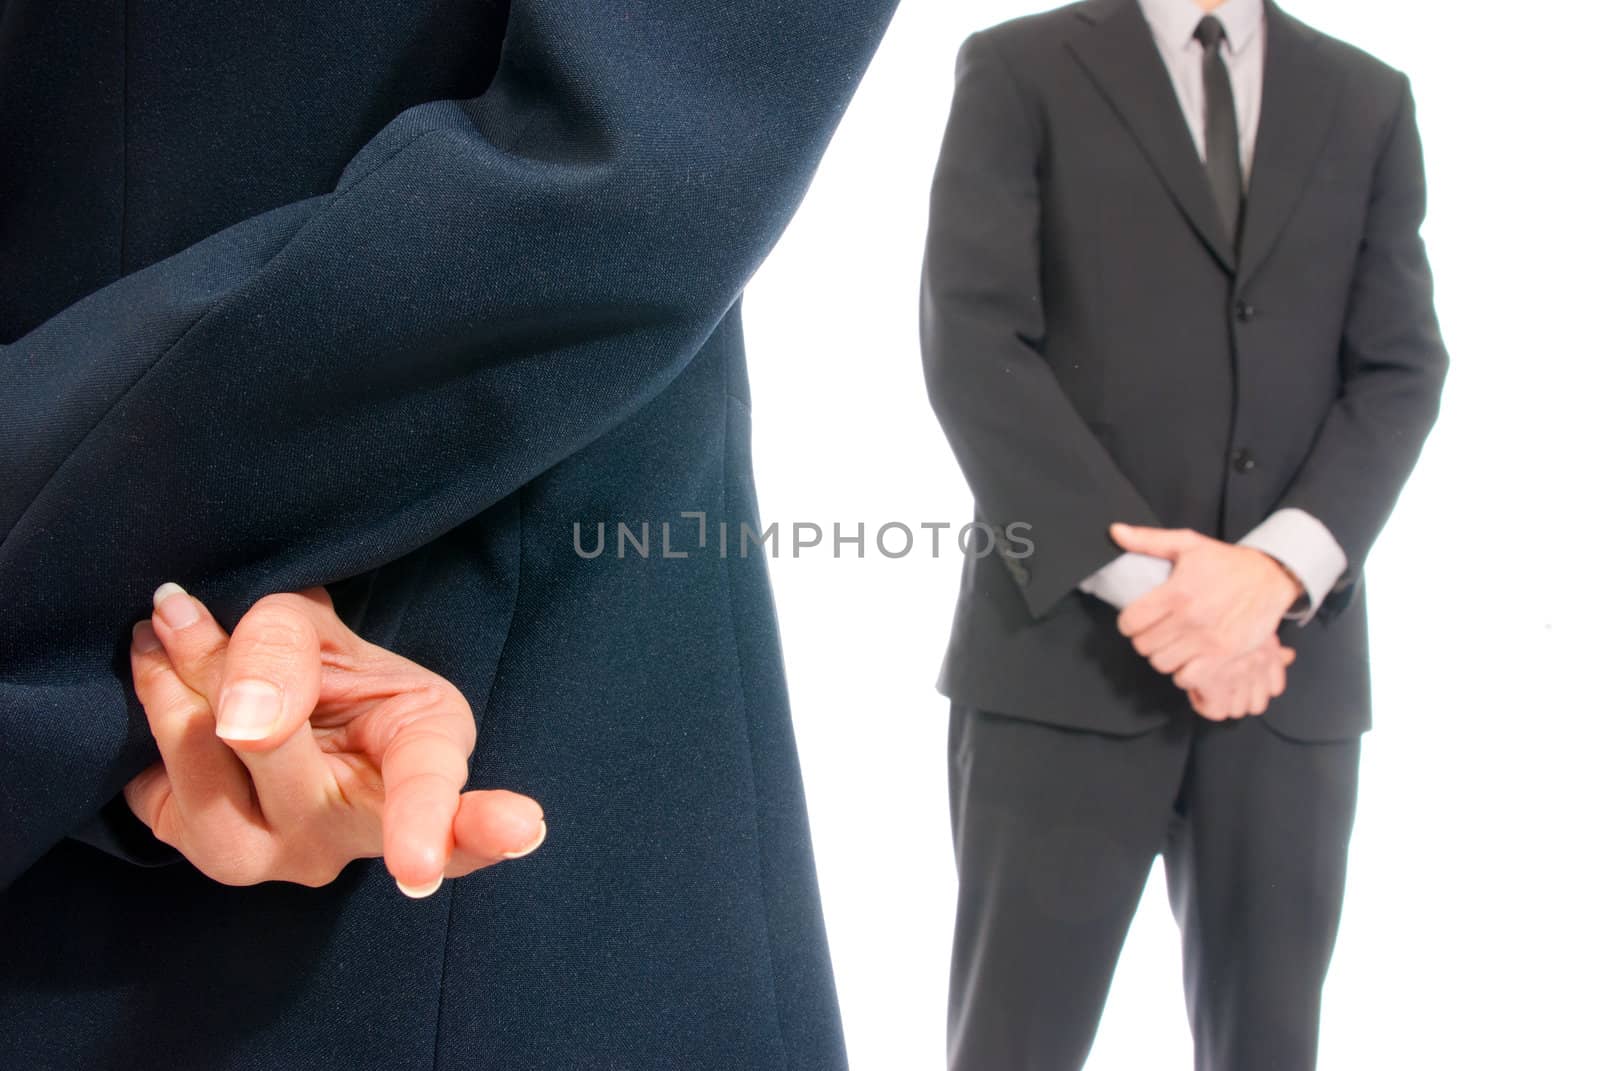 Business concept fingers crossed in front of boss isolated on white background by dgmata